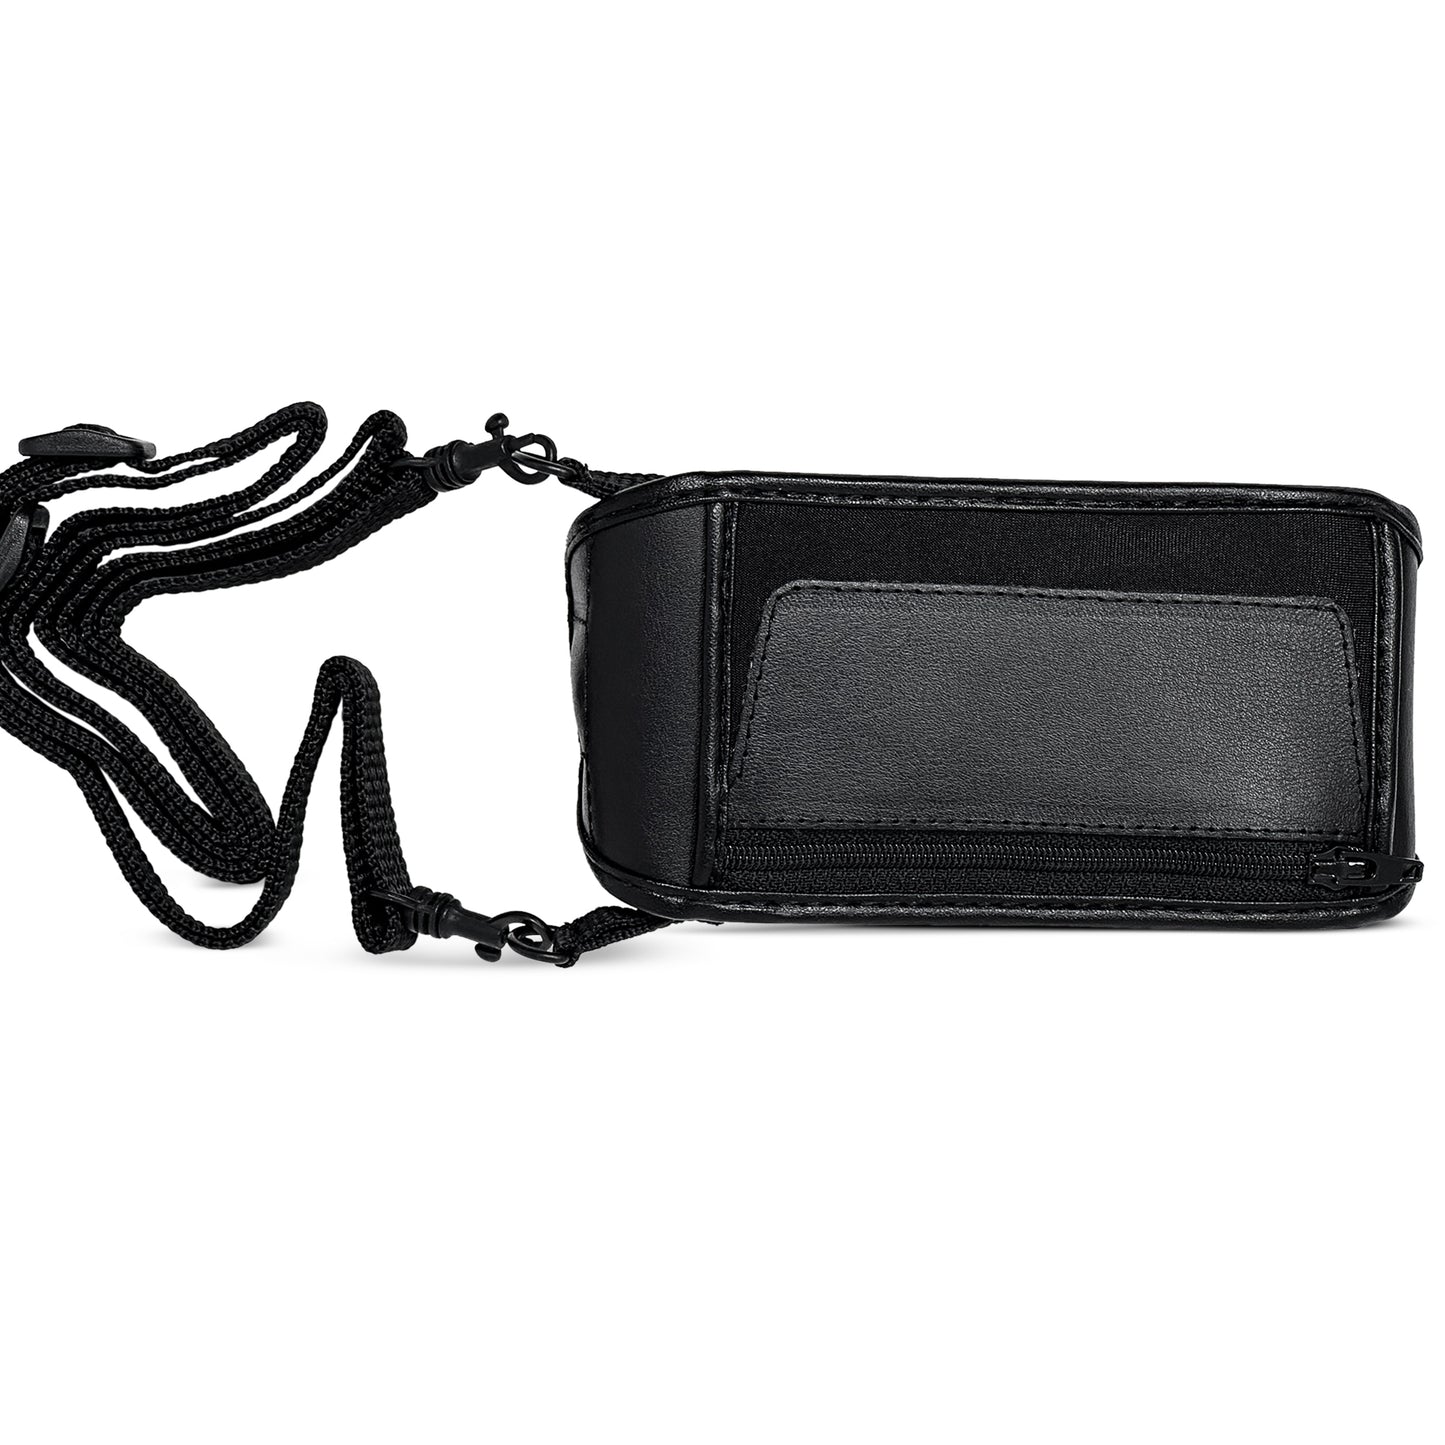 HIMS SensePlayer Fitted Leather Case with straps by Turtleback